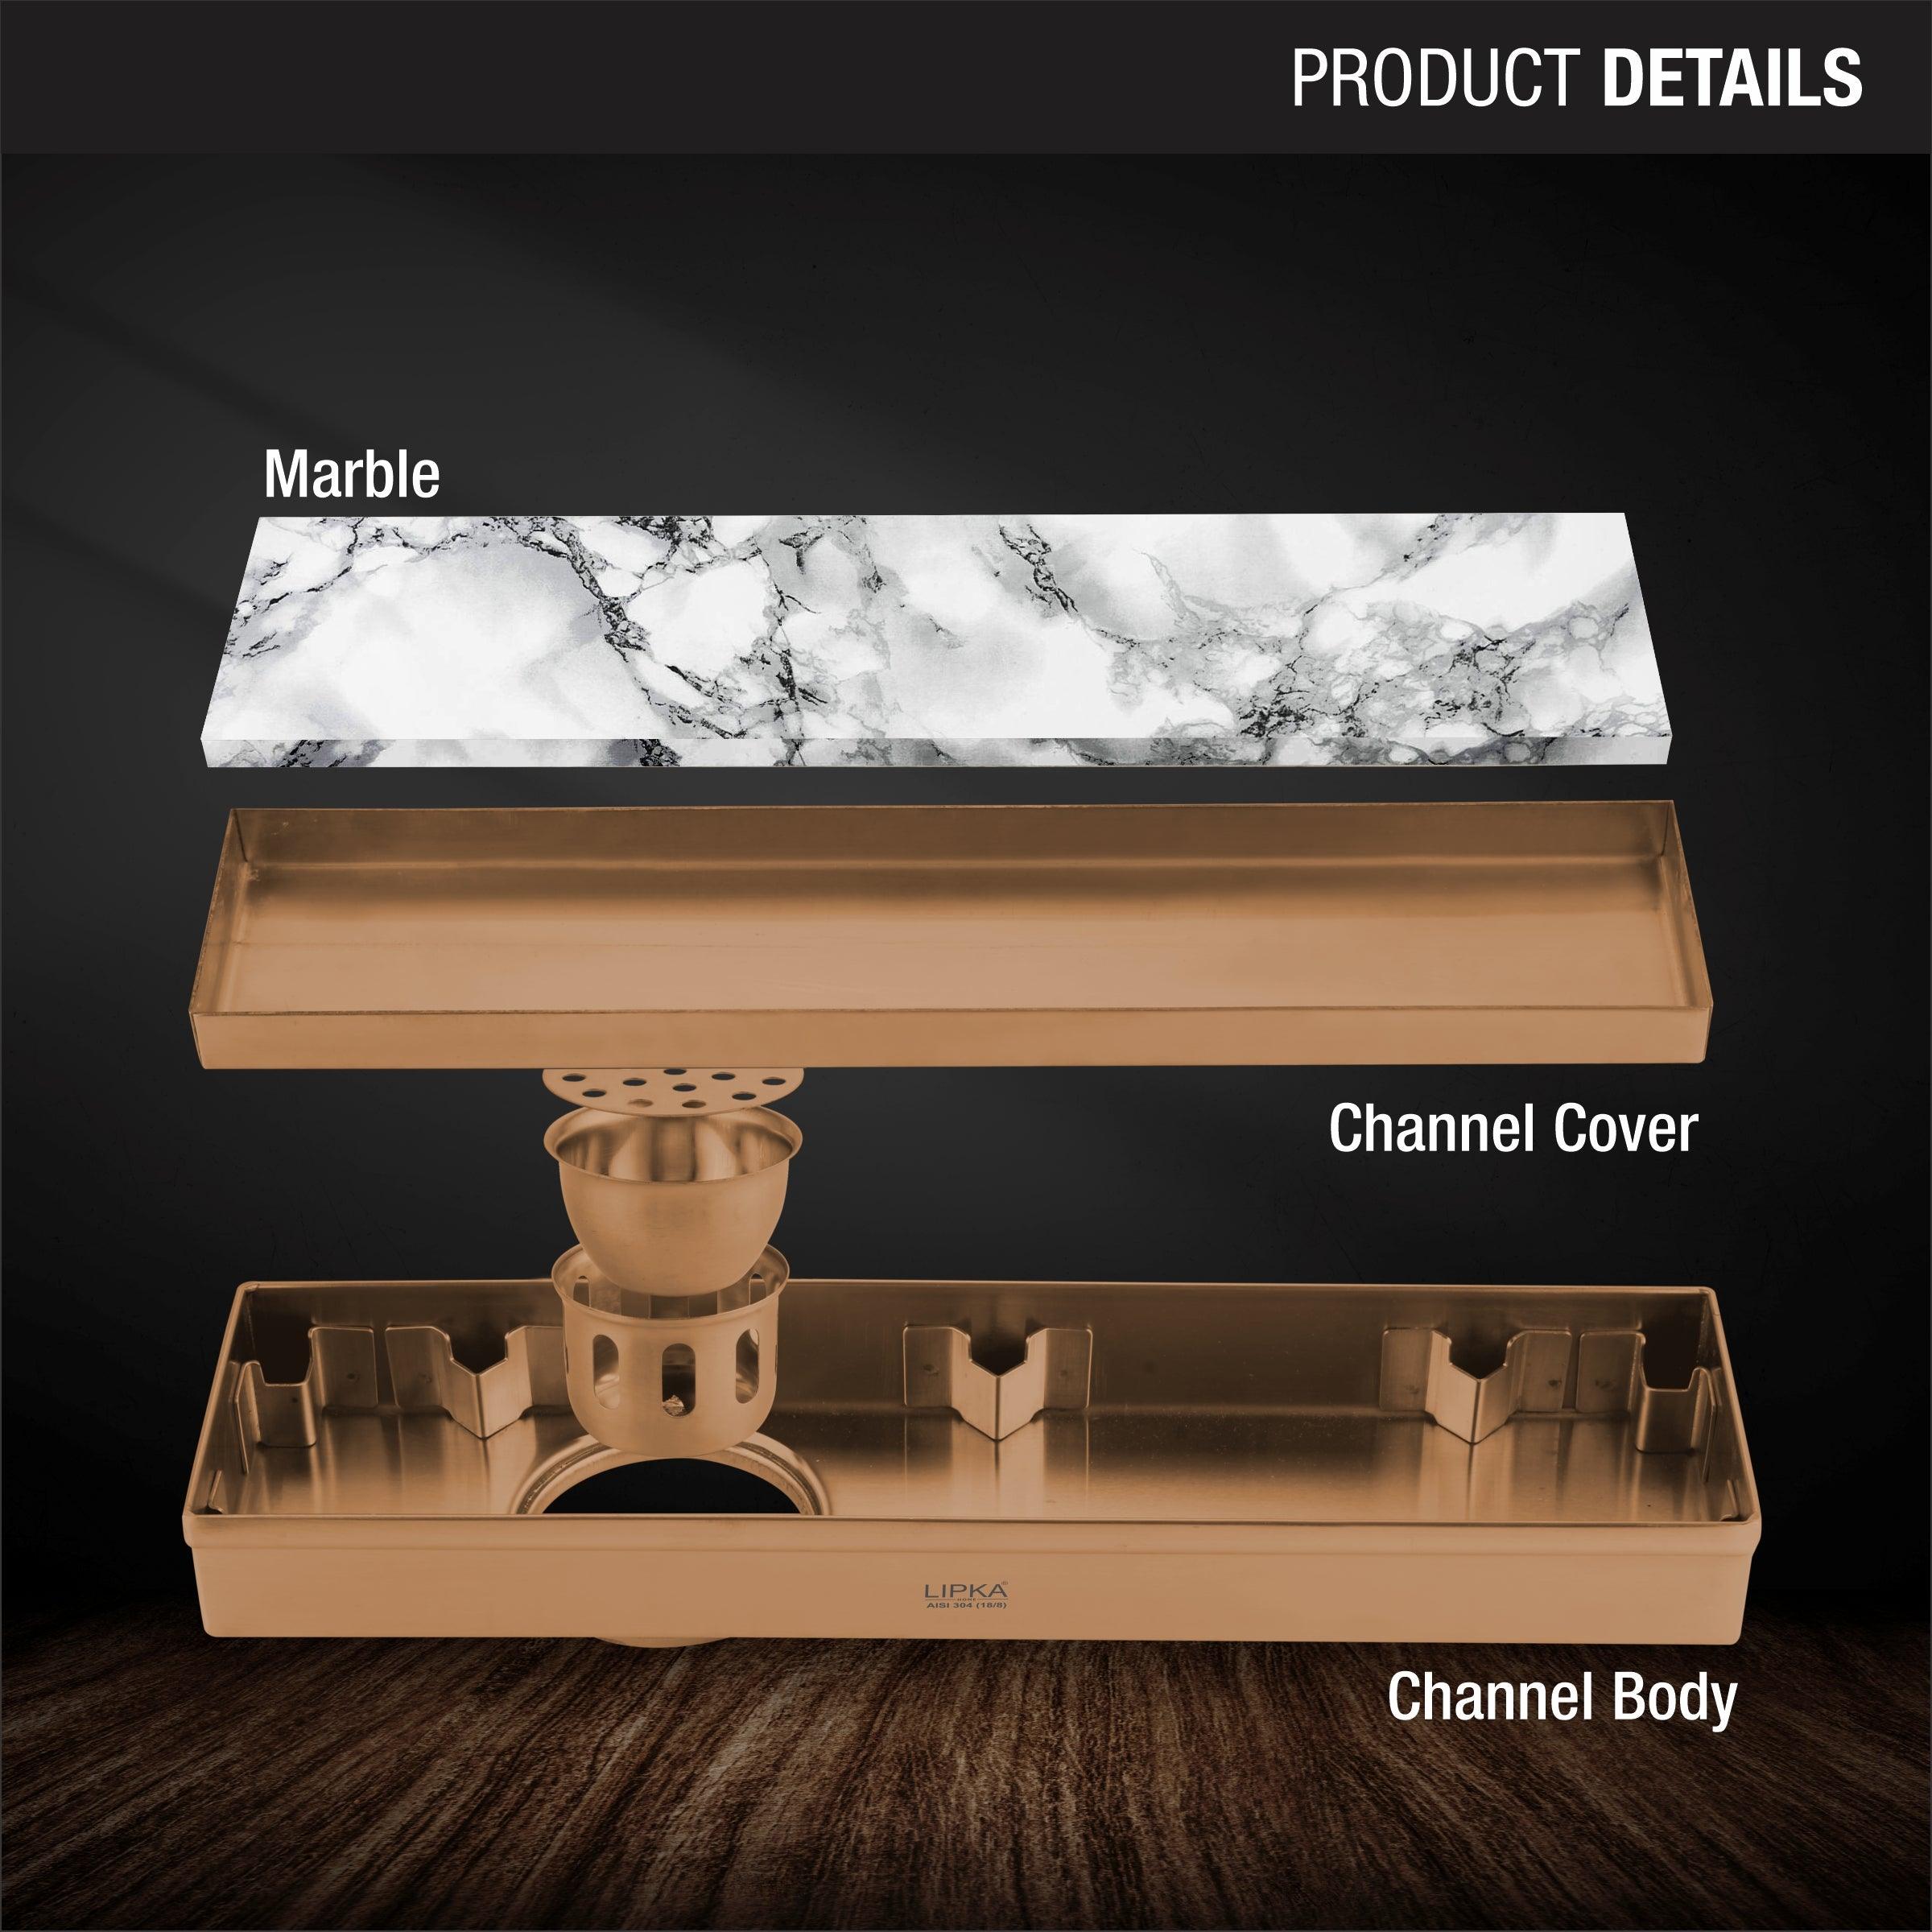 Marble Insert Shower Drain Channel - Antique Copper (24 x 3 Inches) product details